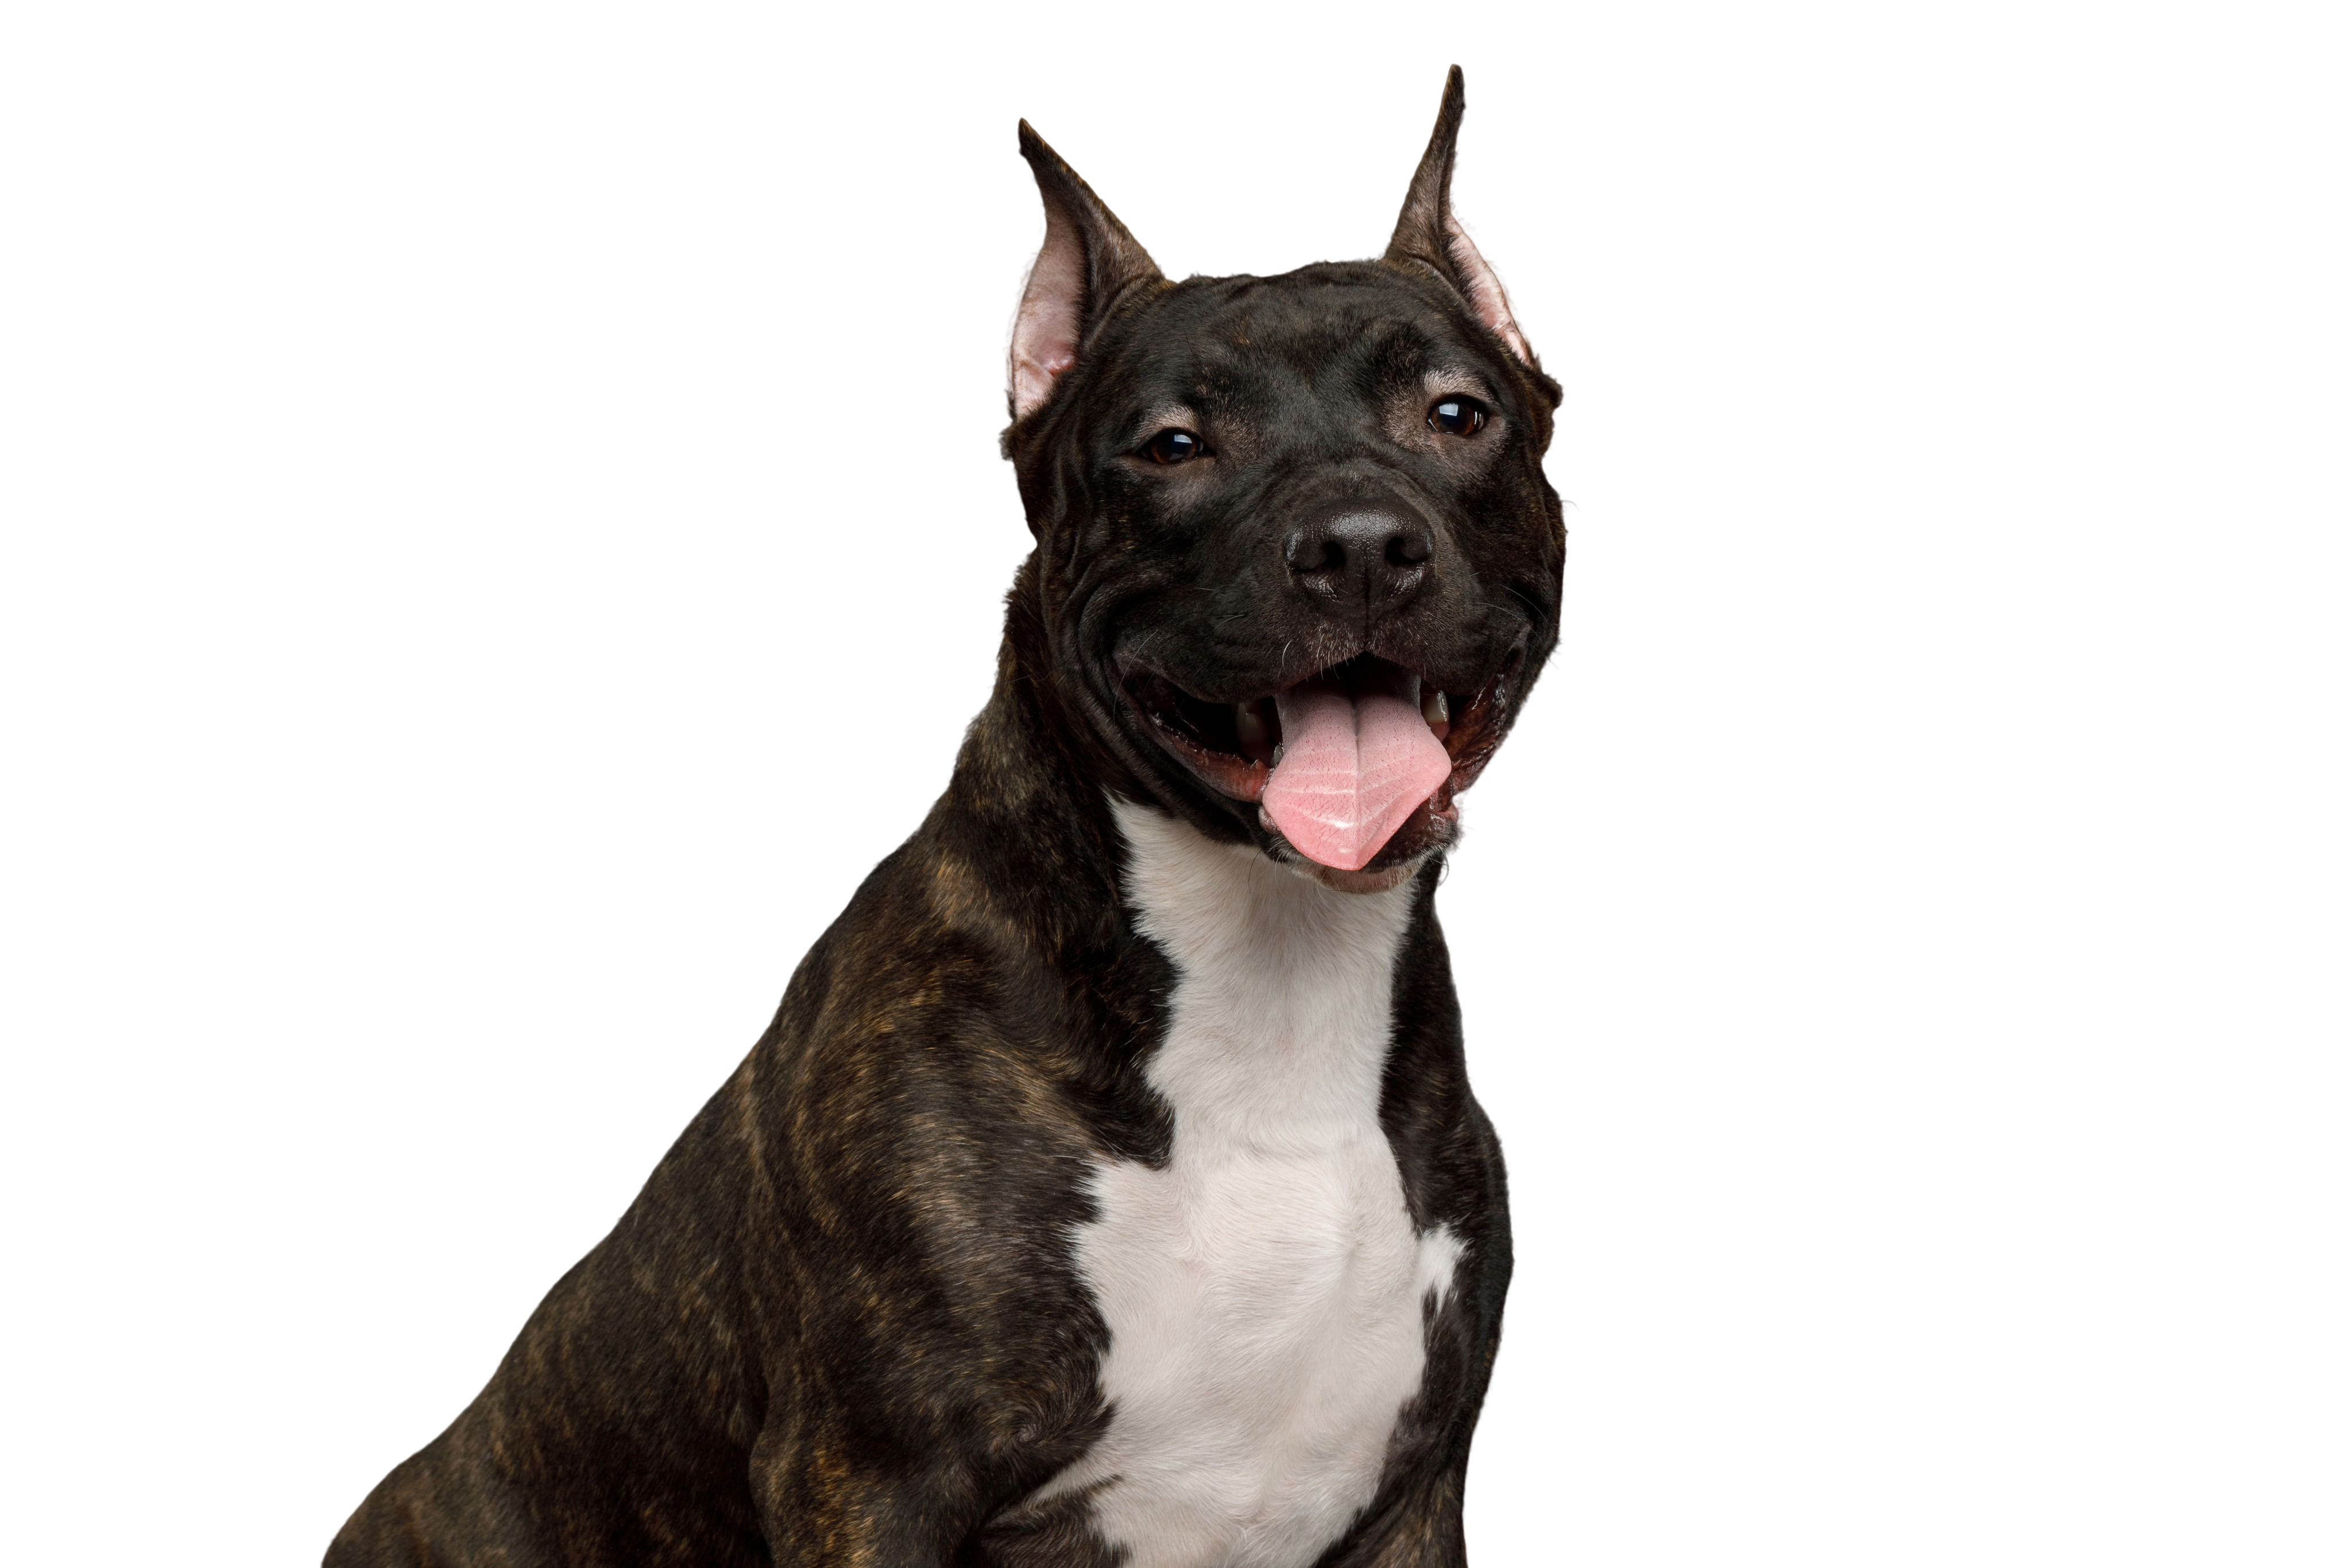 can a american staffordshire terrier guard a home